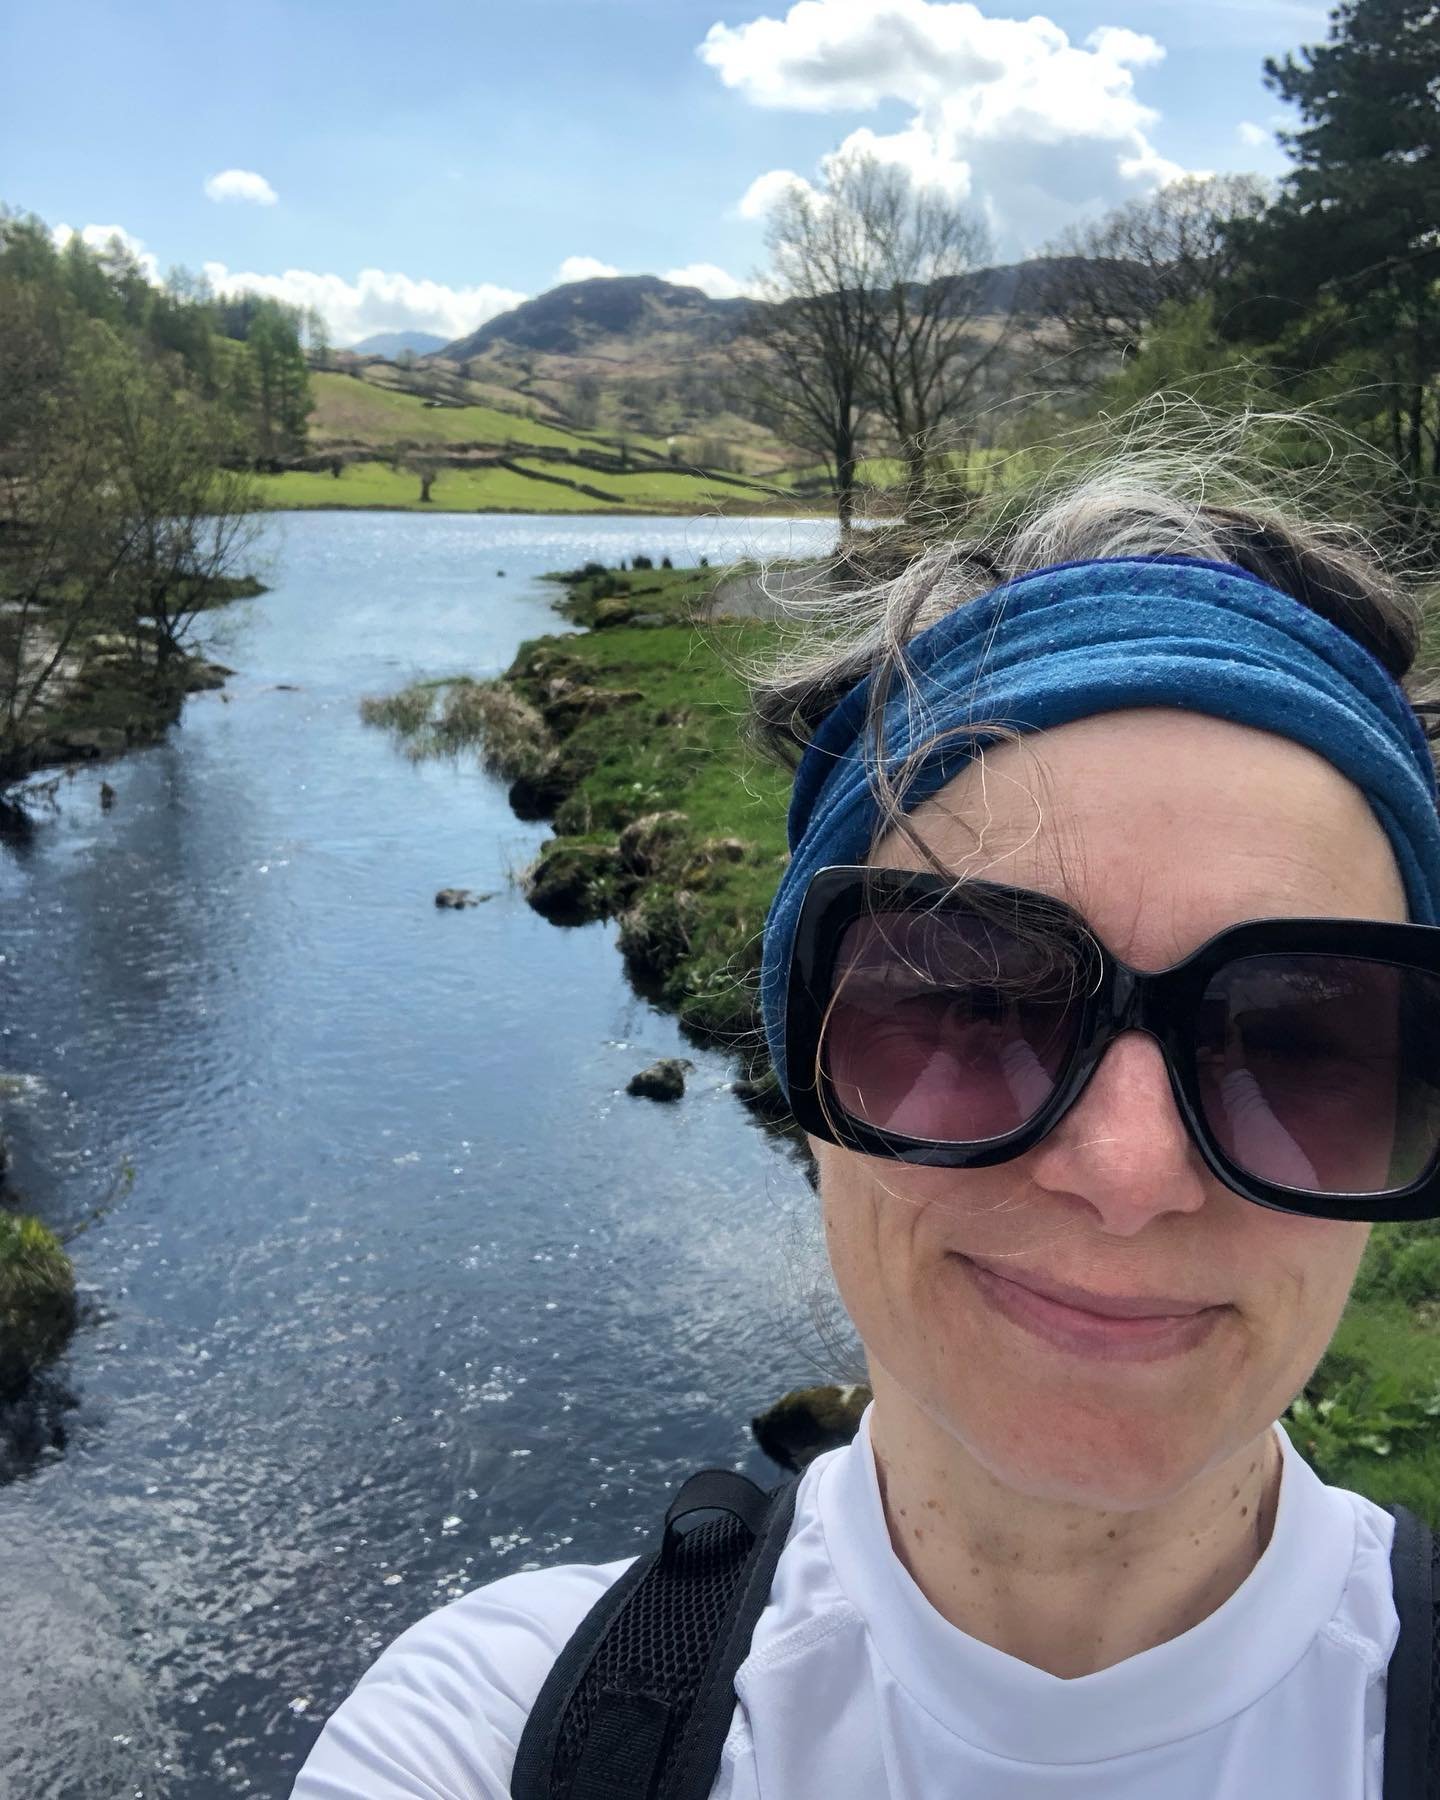 💕I flippin LOVE May 

Best month of the year and It&rsquo;s basically summer in the lake district

✨So I&rsquo;m maxxing all the JOY meeting friends for early morning fell walks and wild swimming in the evenings 
Soaking up the blooms, blossoms and 